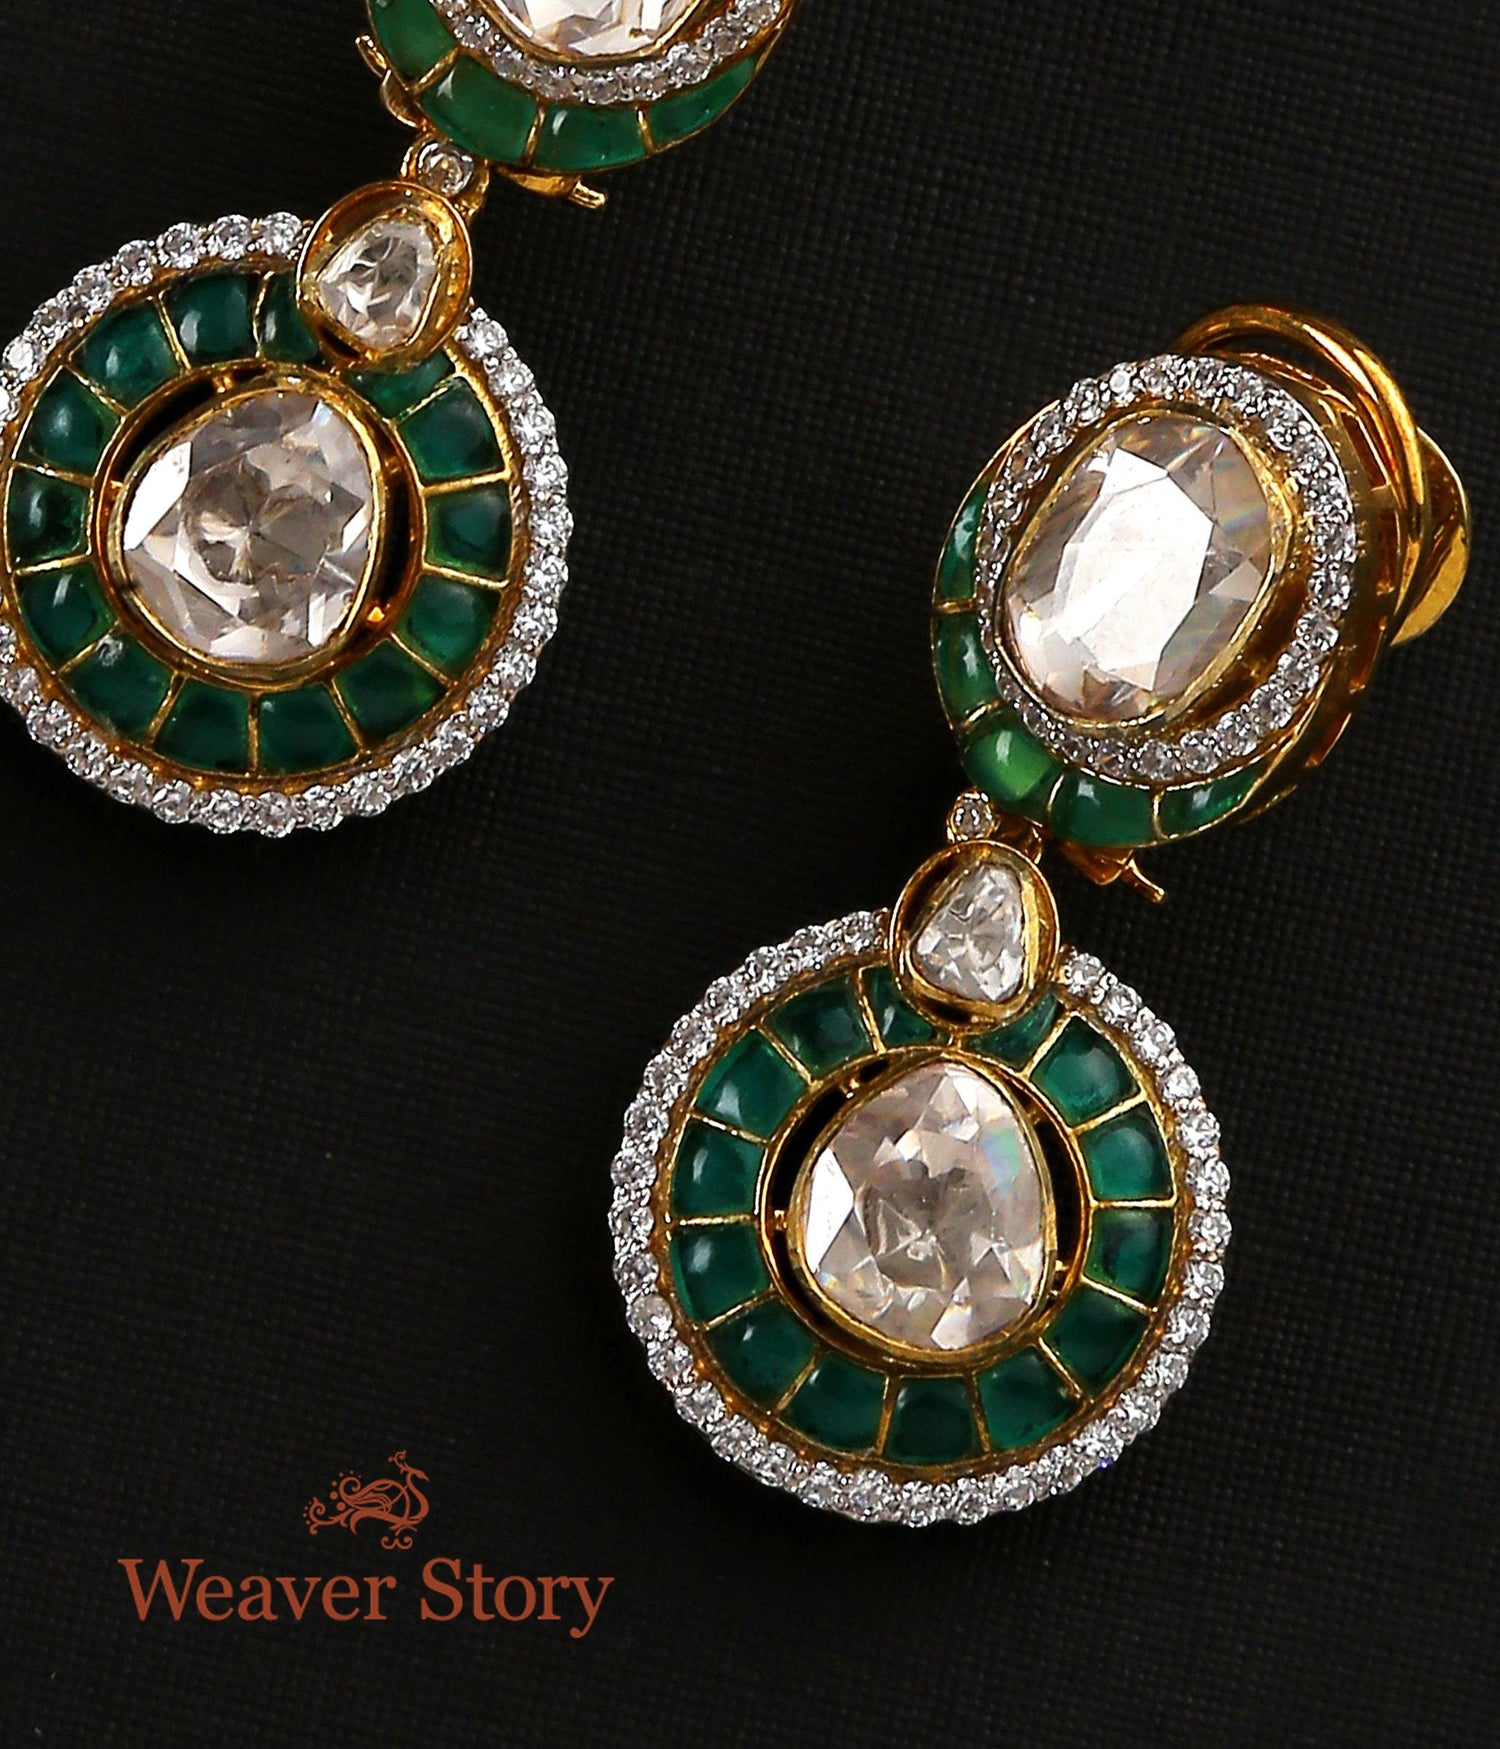 Aqsa_Earrings_with_Moissanite_Polki_Crafted_in_Pure_Silver_WeaverStory_03